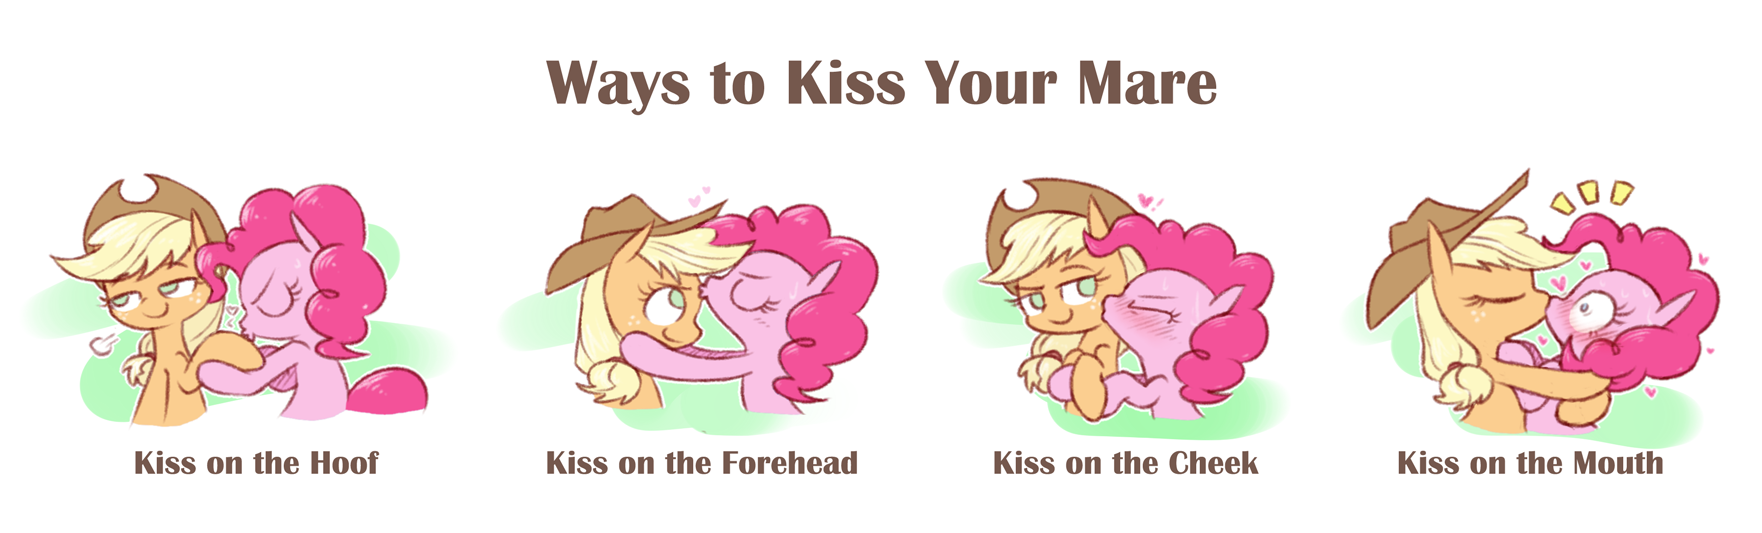 https://derpicdn.net/img/view/2016/7/6/1194422__pinkie+pie_applejack_shipping_suggestive_comic_lesbian_kissing_applepie_artist-colon-raridashdoodles_ways+to+kiss+your+mare.png